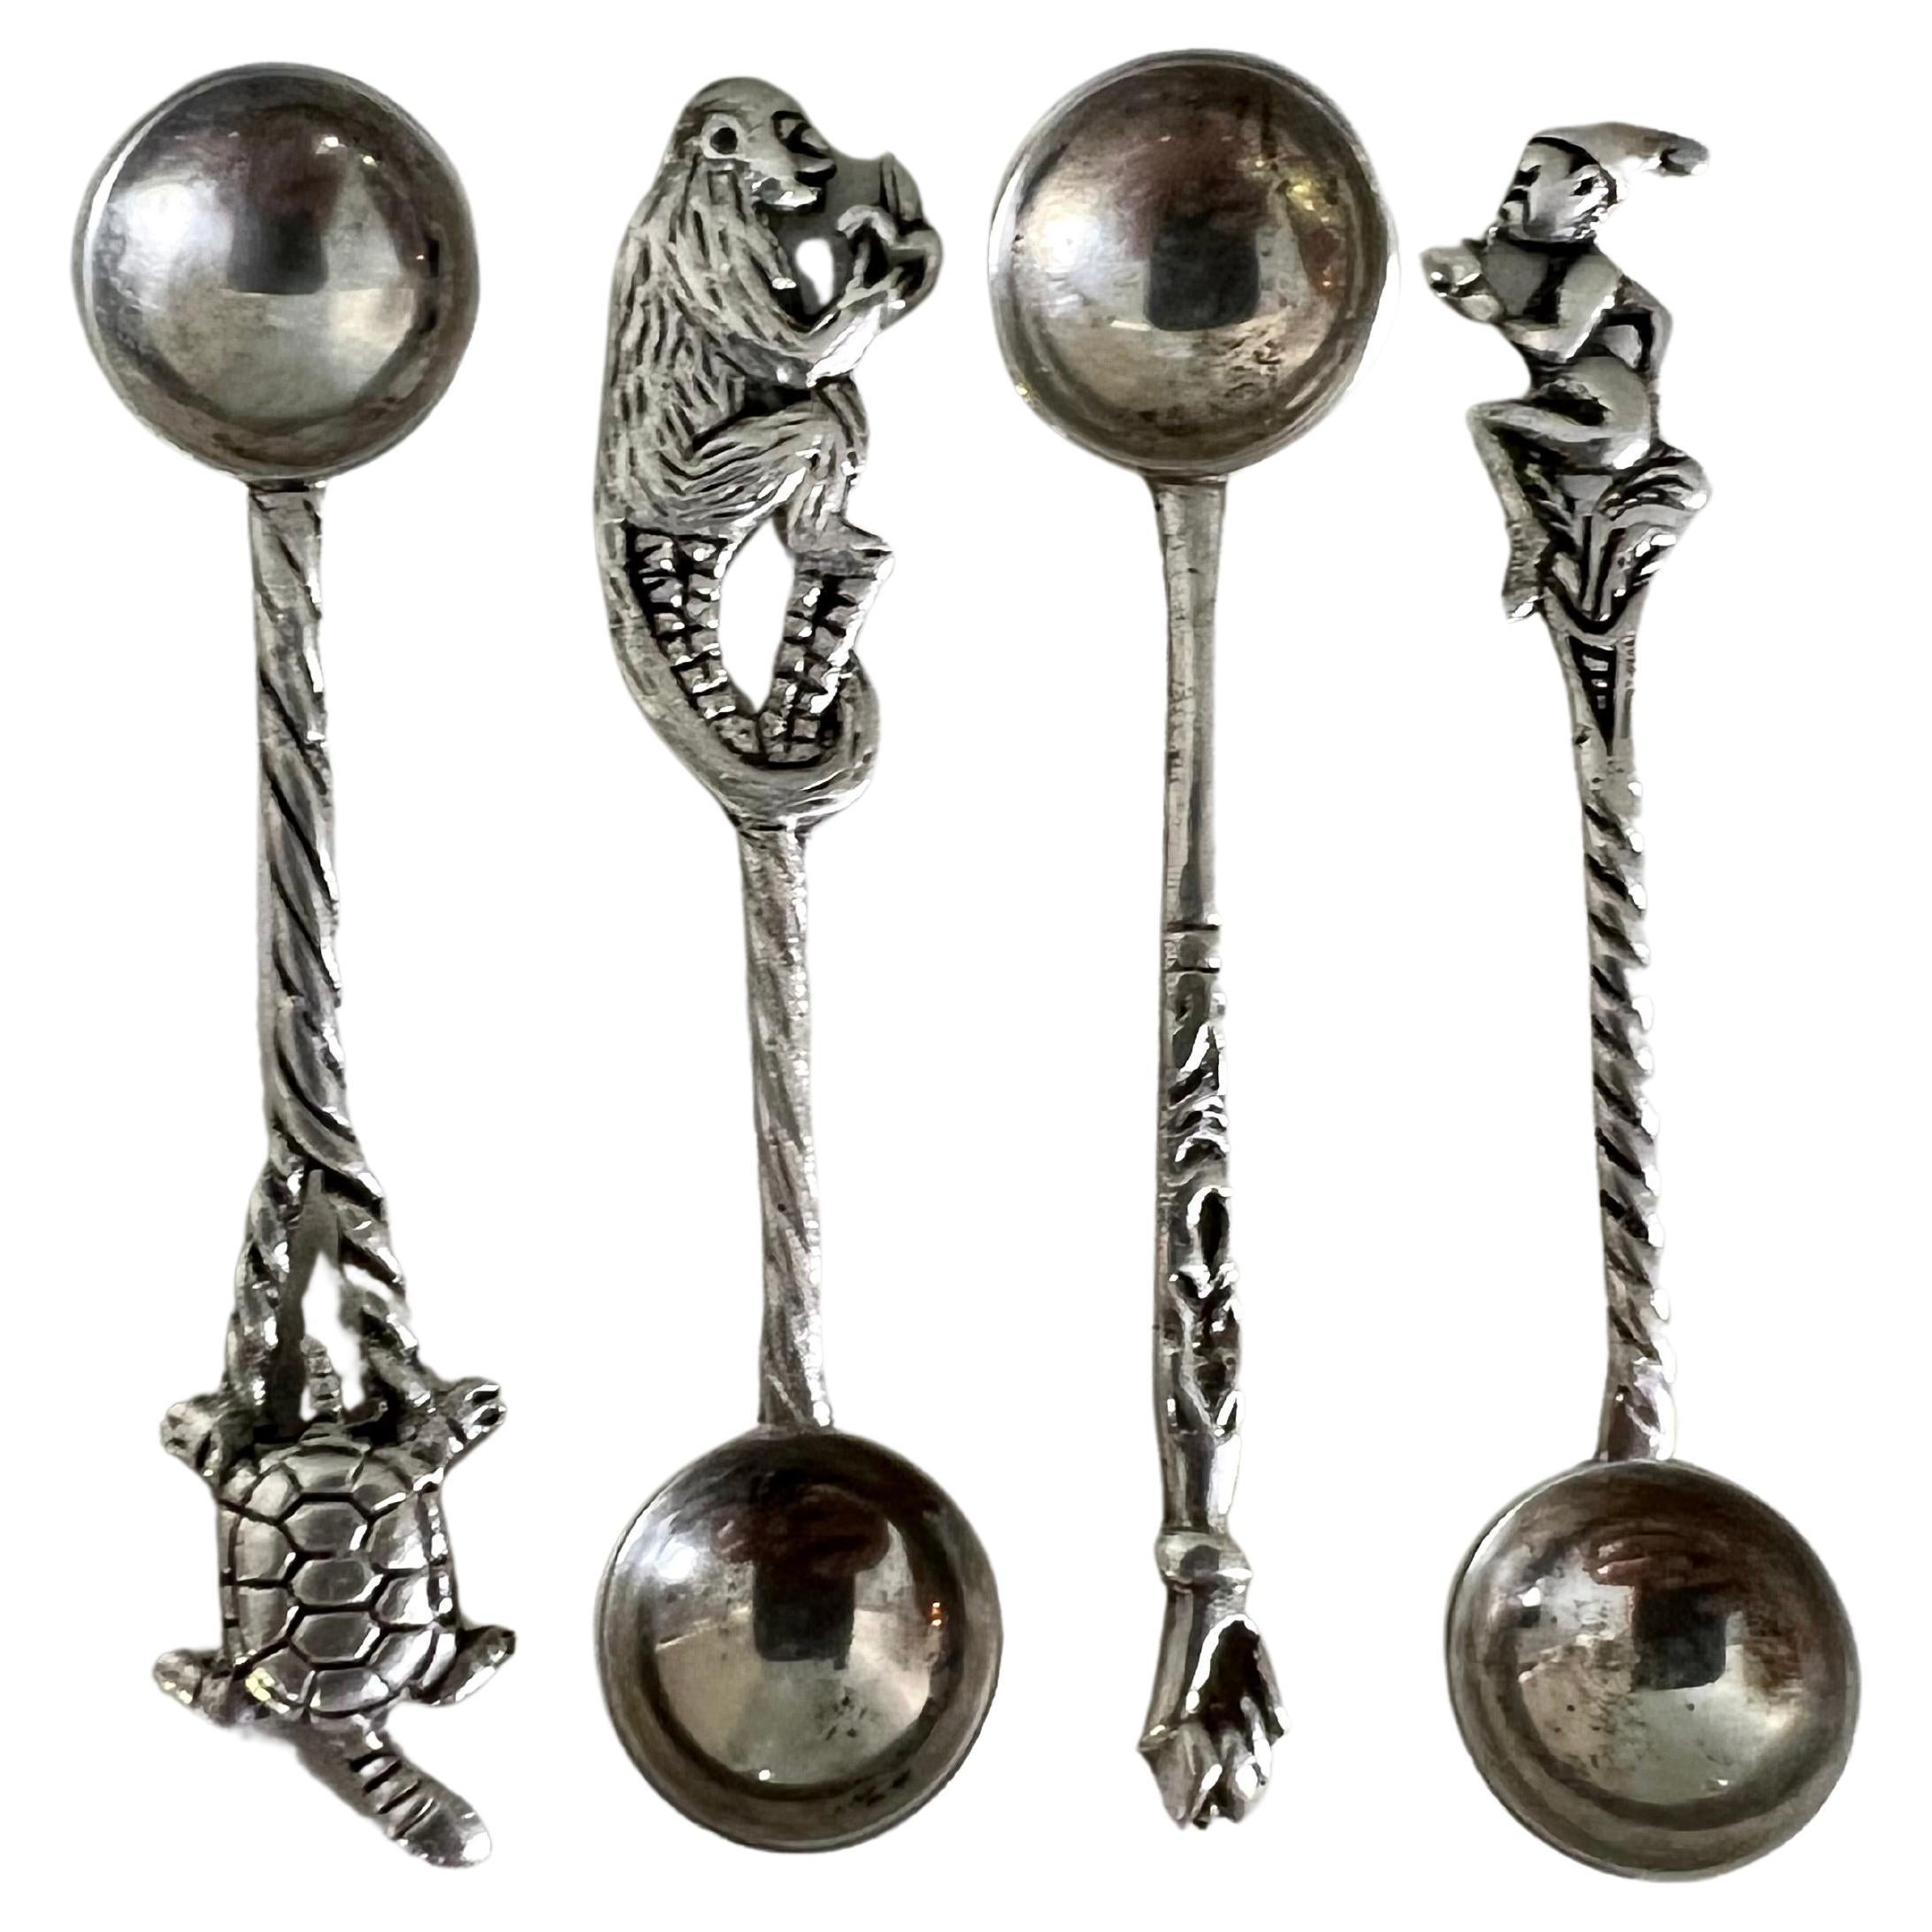 A wonderful set of four sterling silver spoons, each with a different handle, Elf, Monkey, closed fist, turtle - traditionally used for salt cellars, but moving into the 21st century, be creative!! Really a wonderful set.